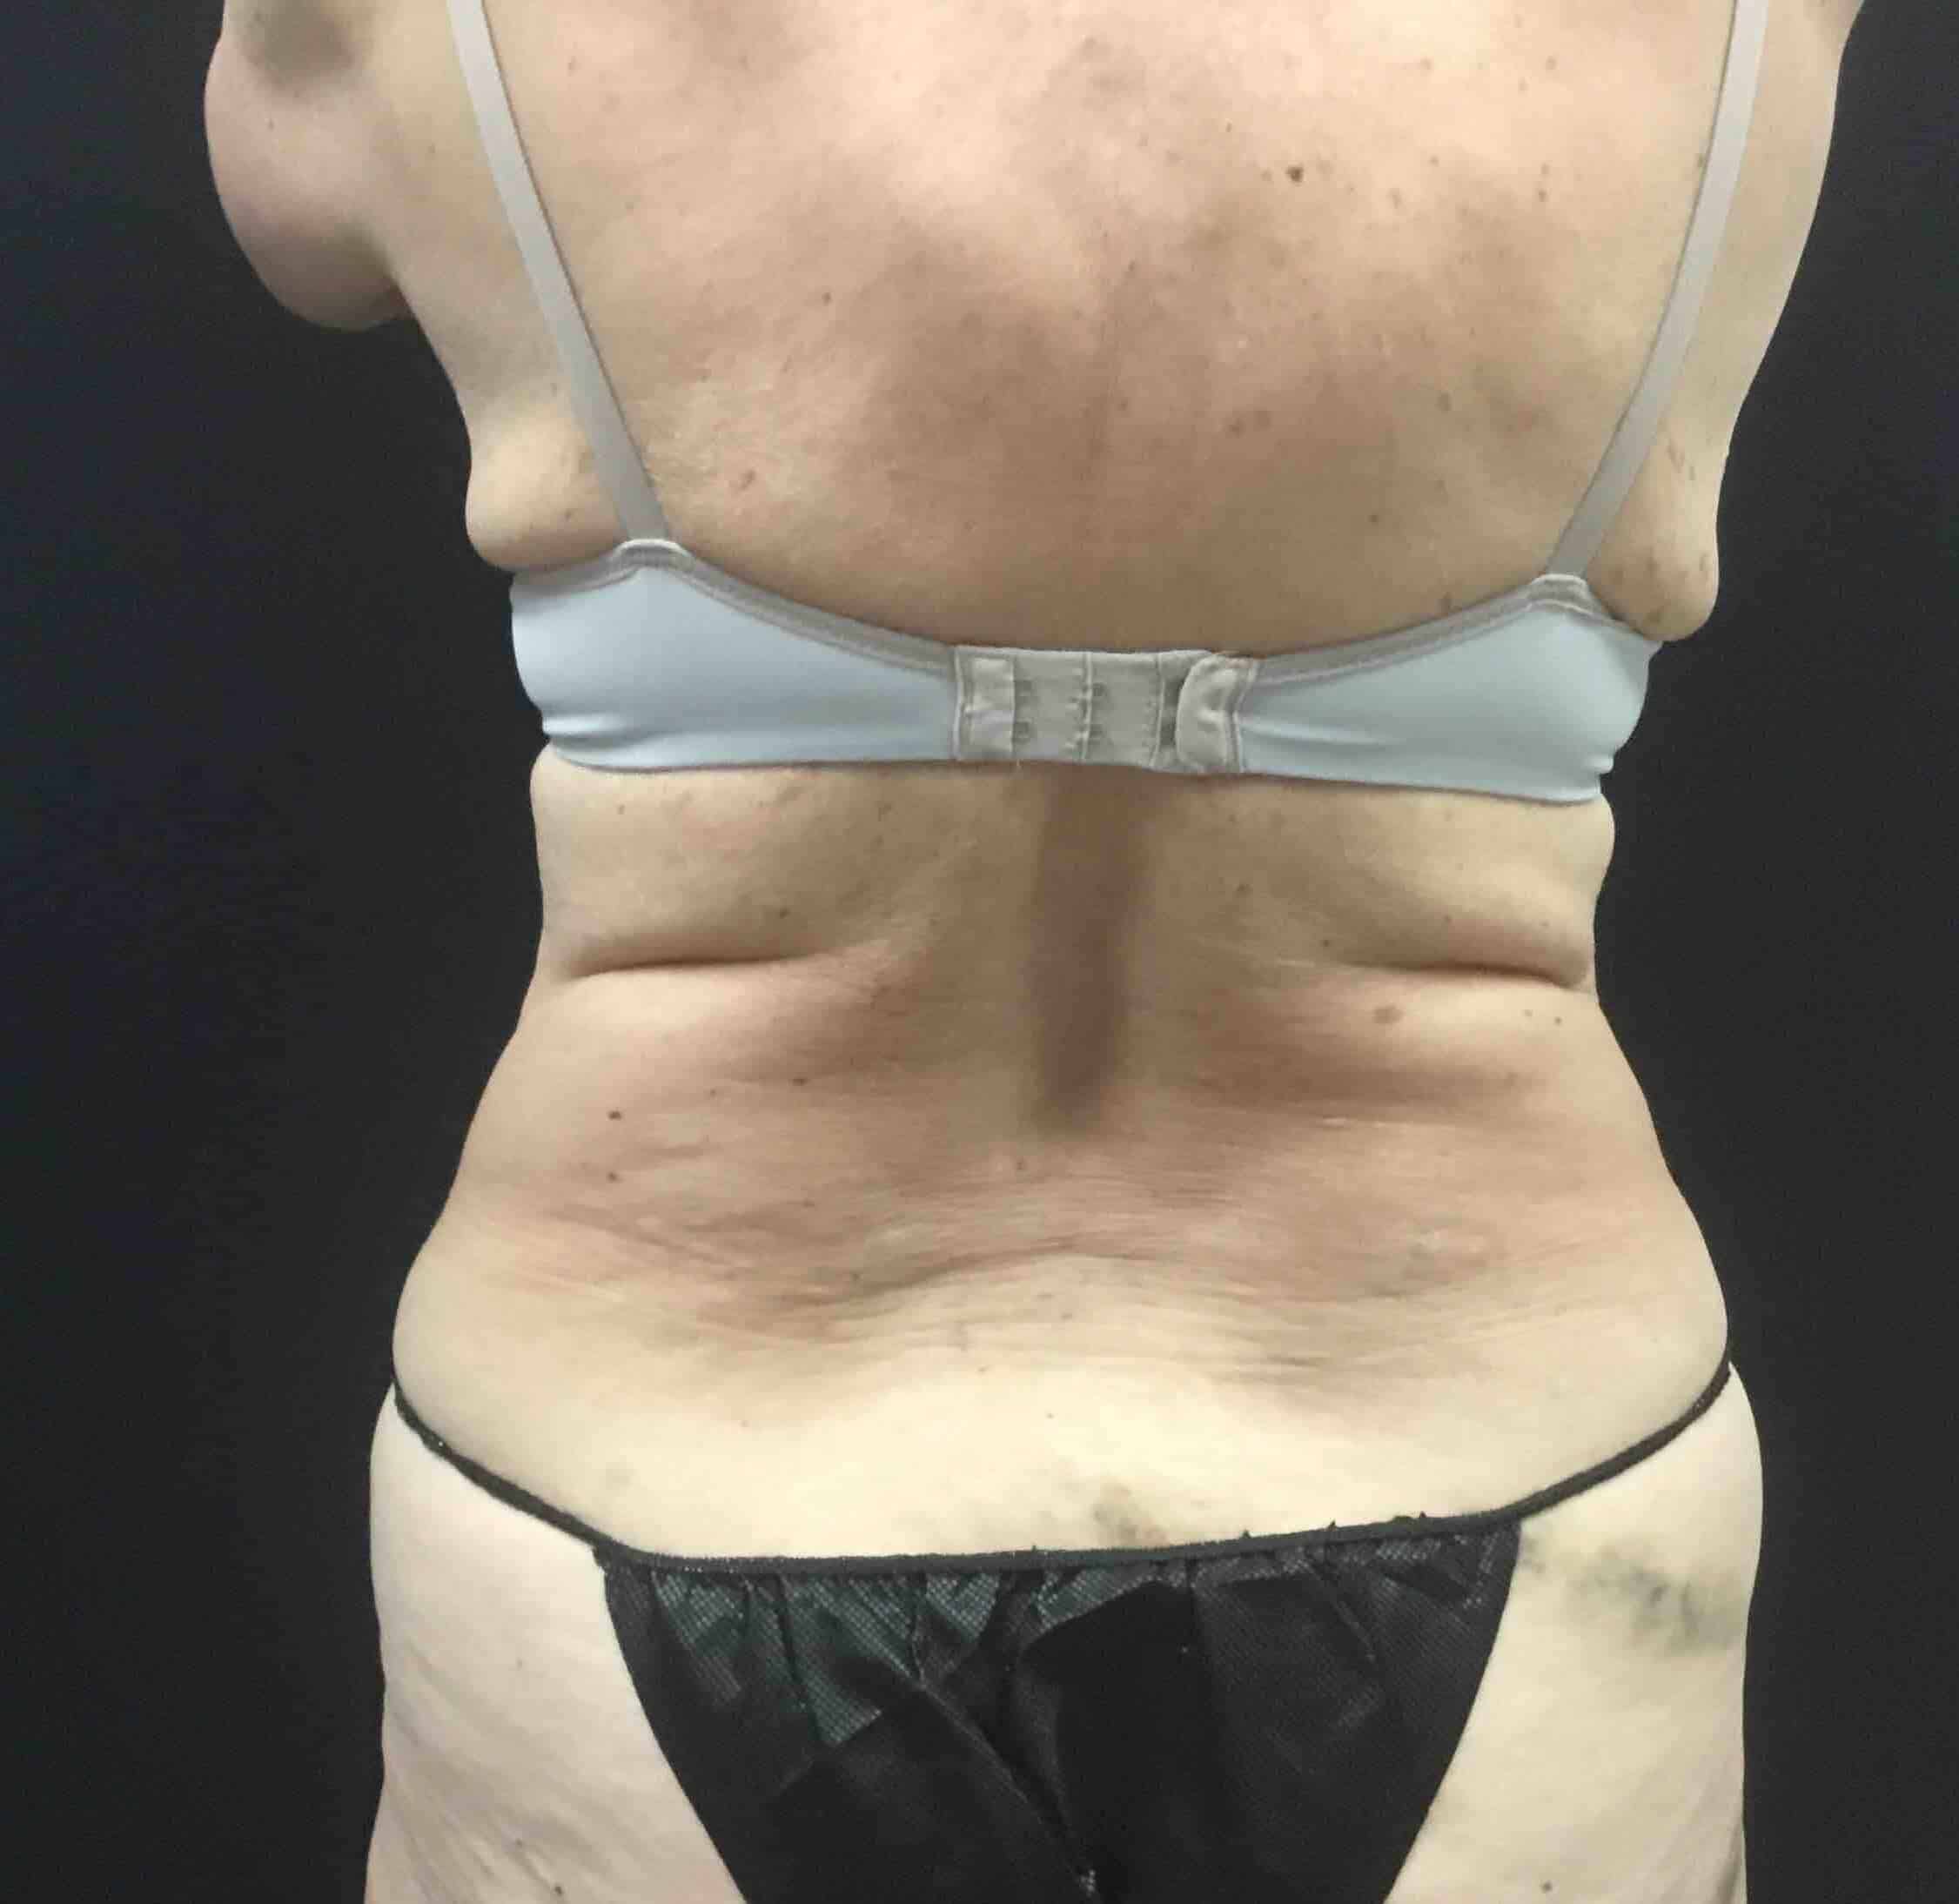 CoolSculpting – Lower Flanks